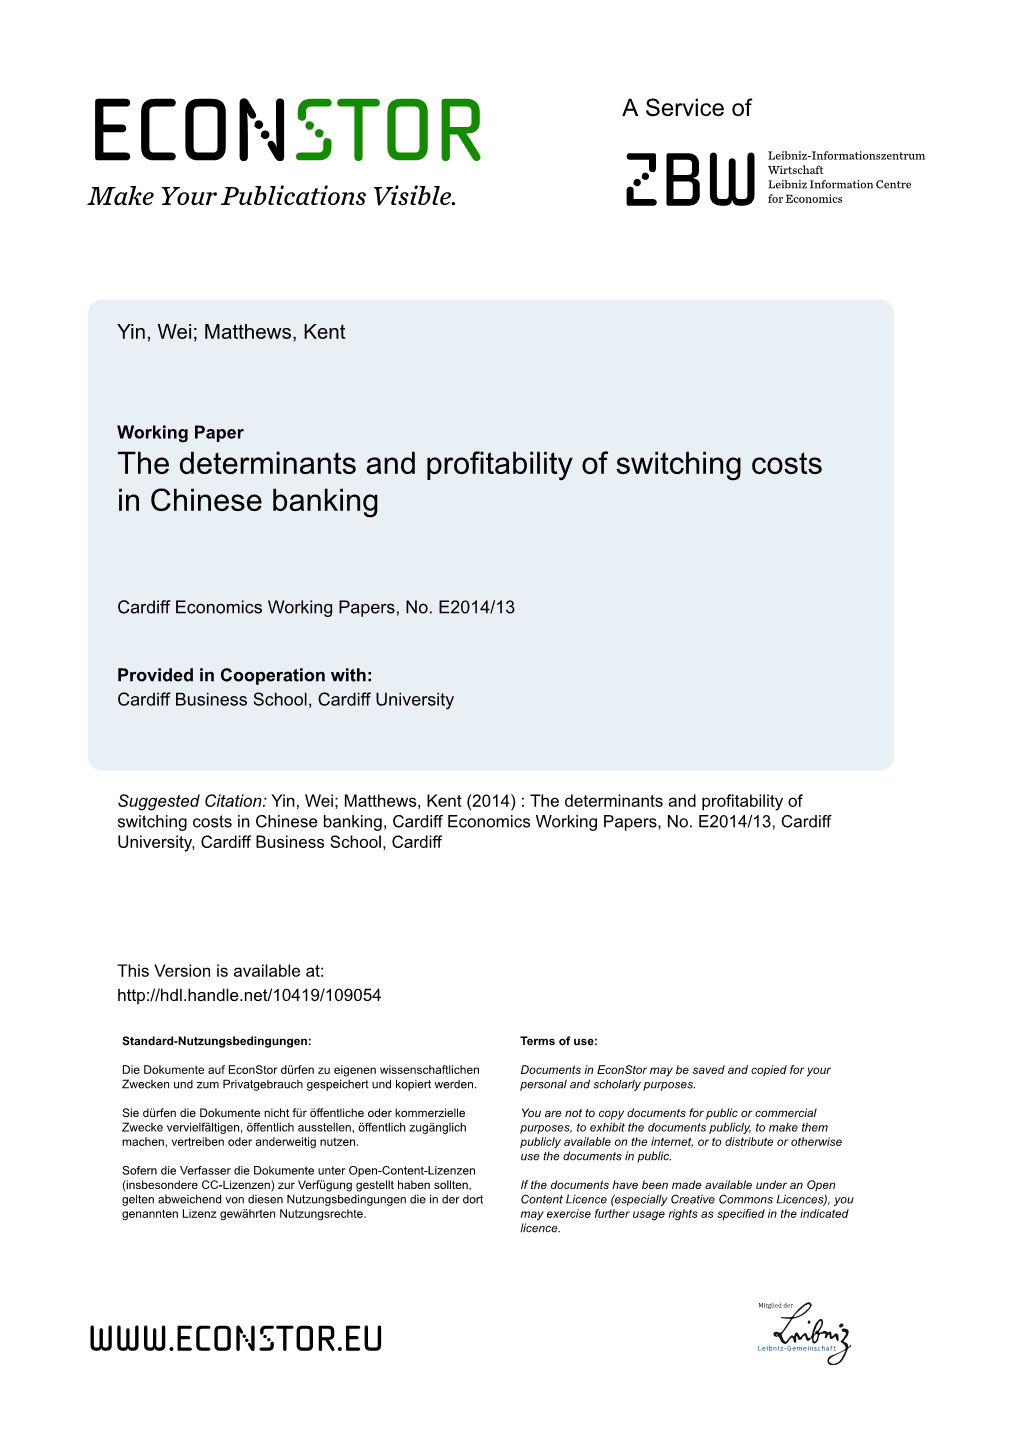 The Determinants and Profitability of Switching Costs in Chinese Banking